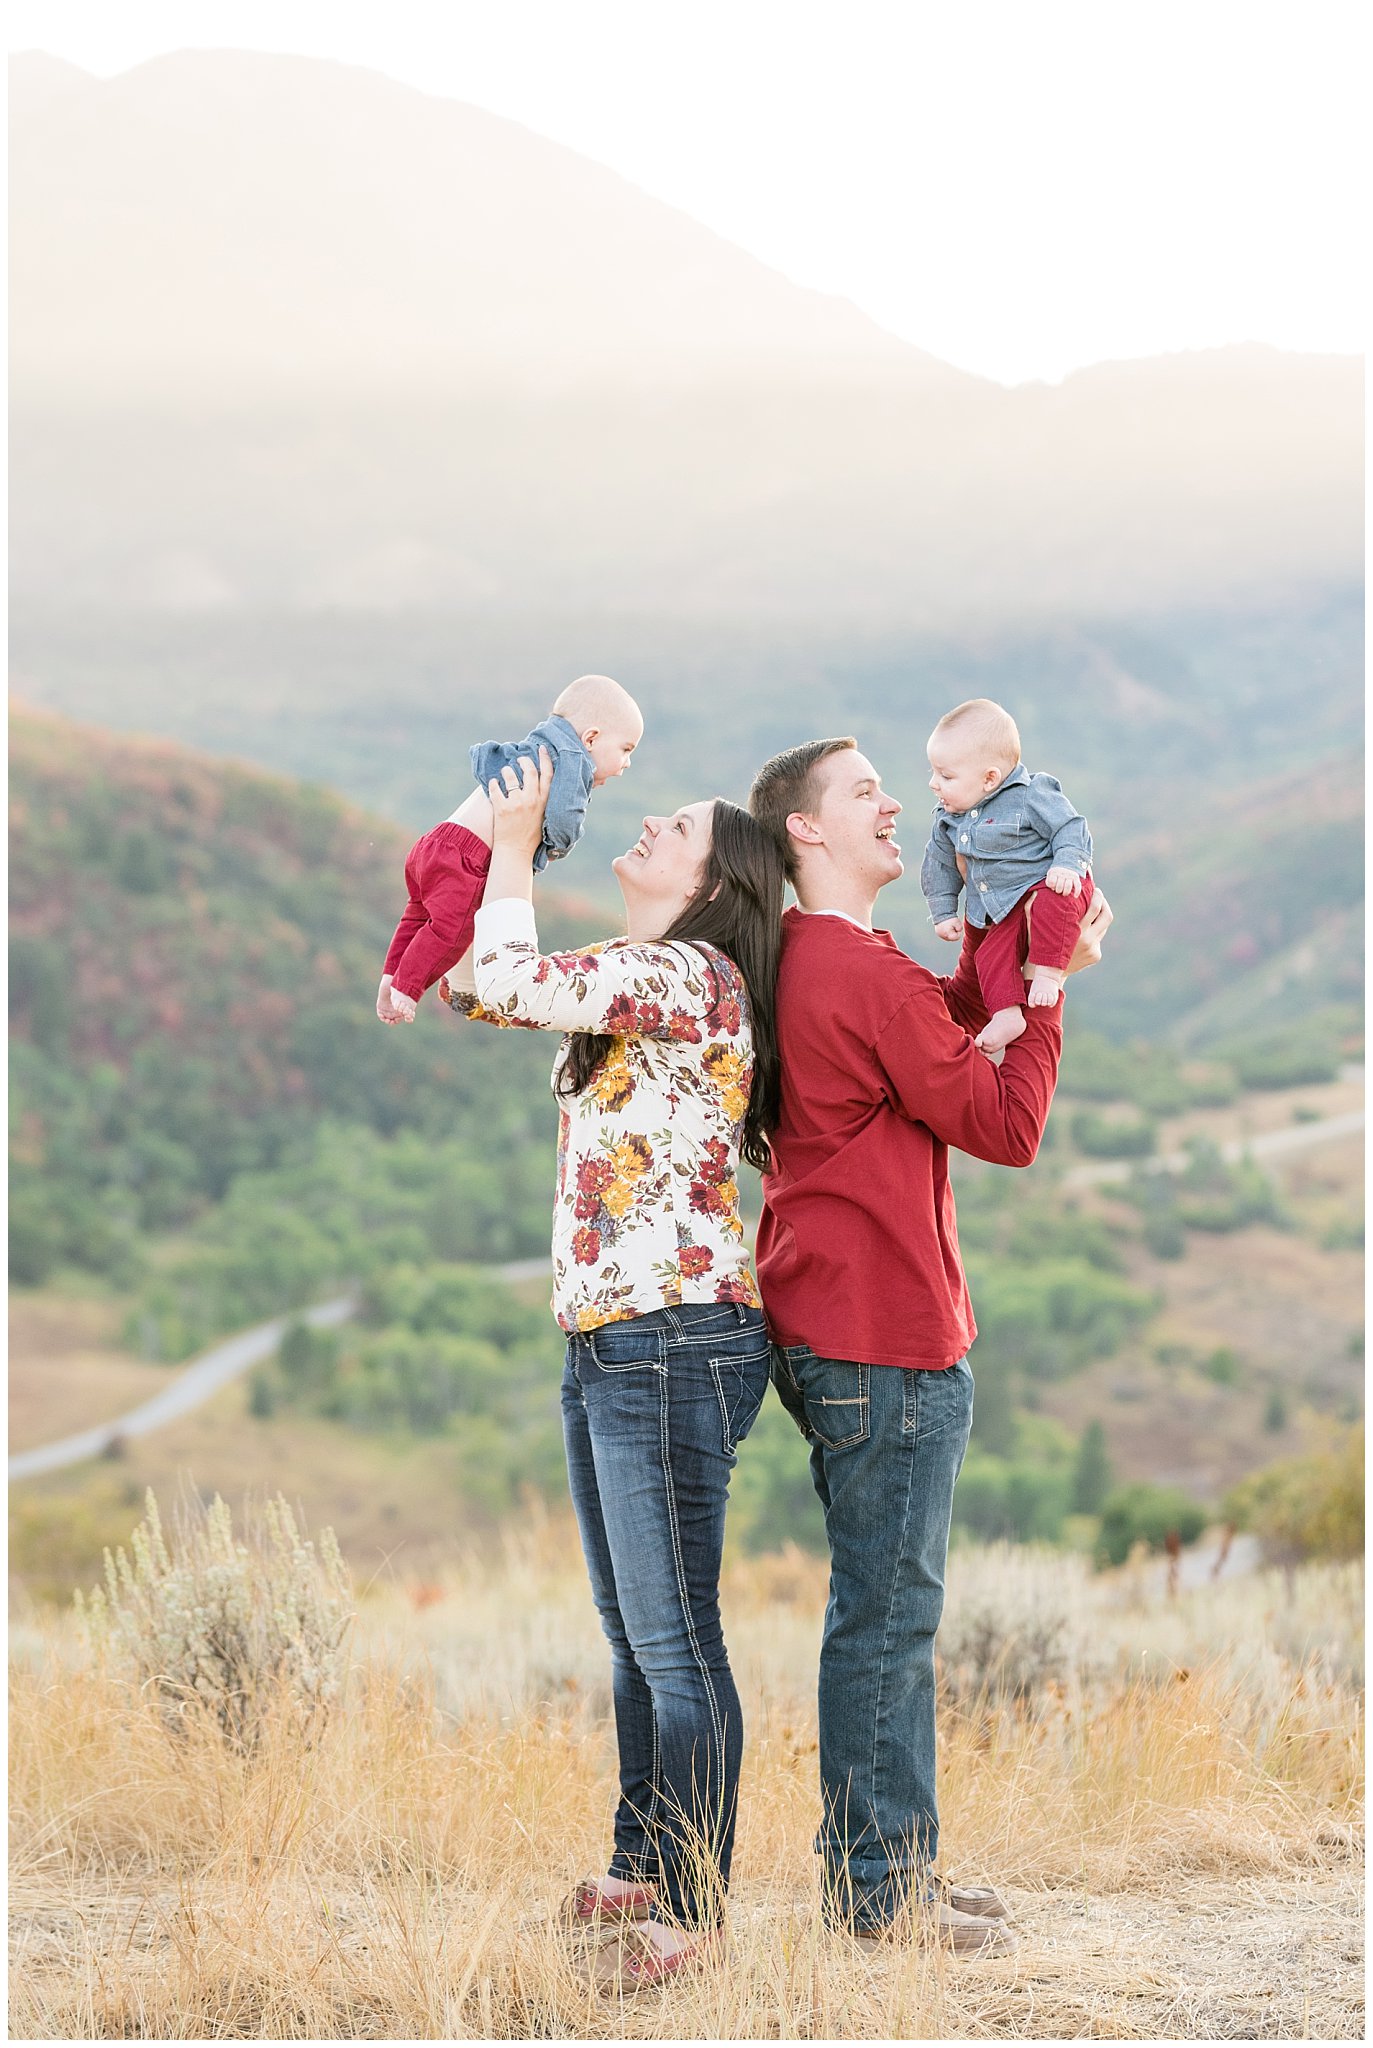 Candid family picture with parents lifting up twin infants | Fall Family Pictures at Snowbasin | Jessie and Dallin Photography